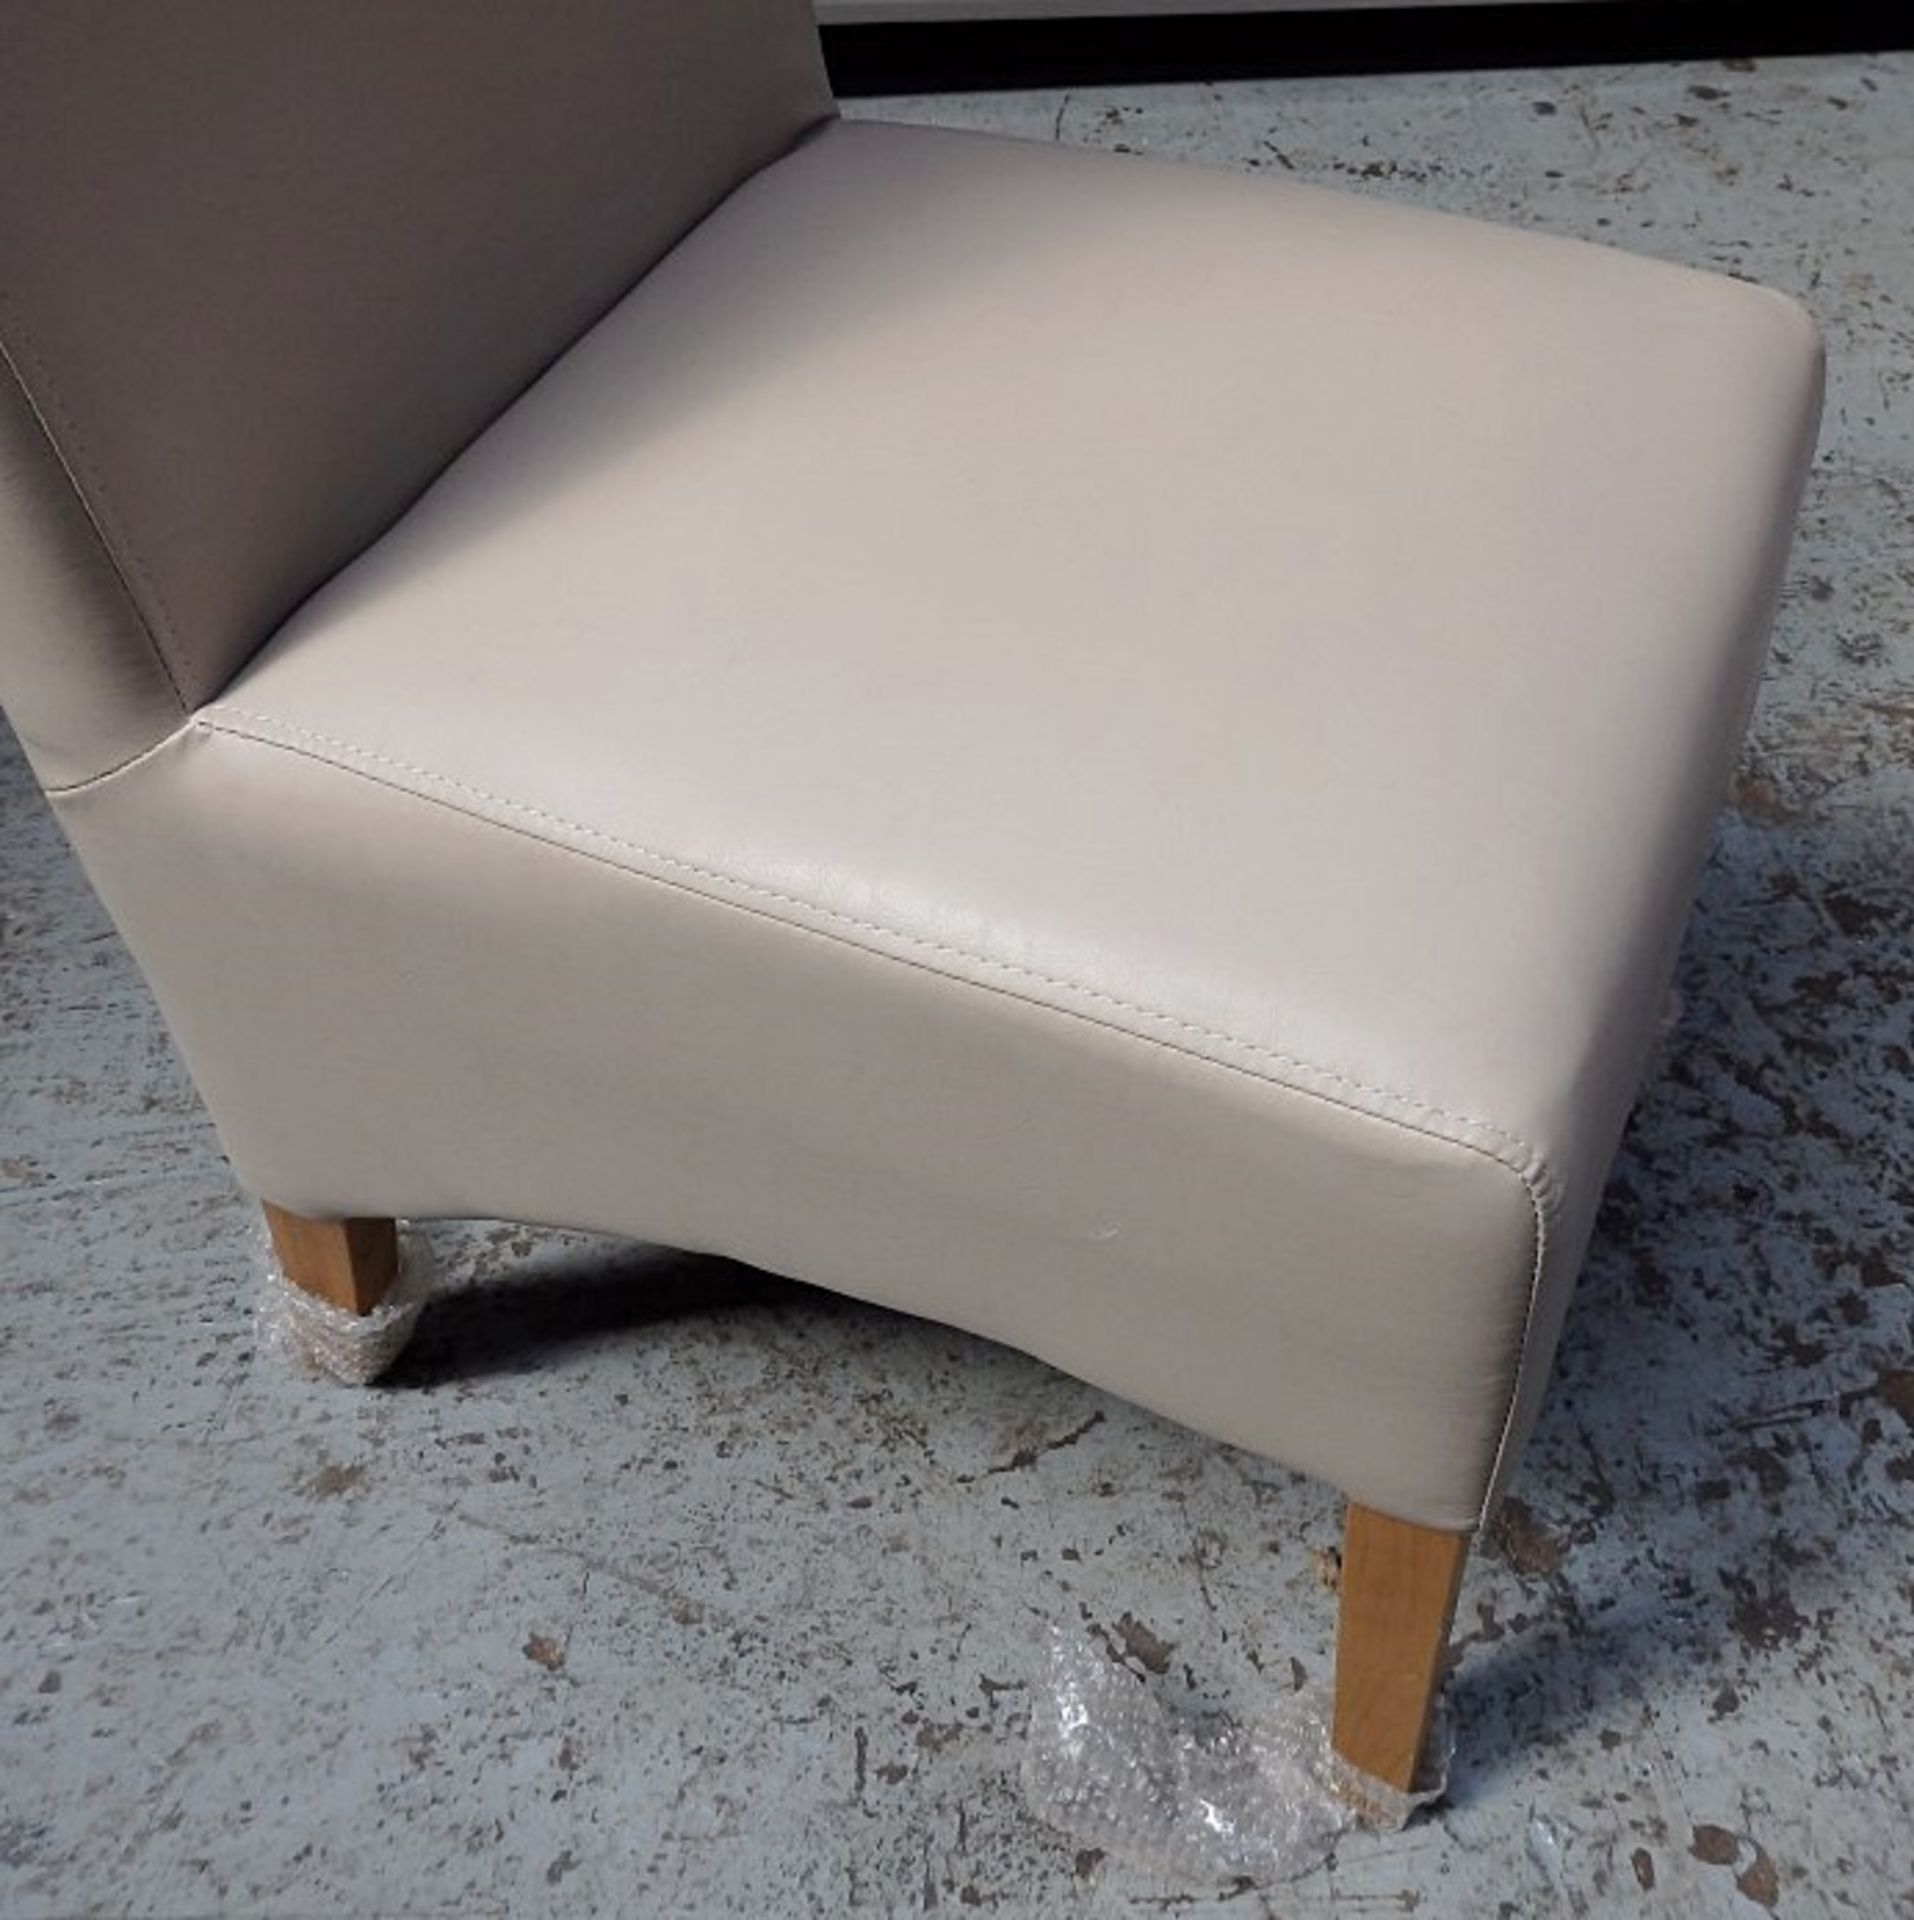 2 x Faux Leather Dining Chairs - Colour: Cream (Ivory) - Seating Dimensions: W44 x D60 x Height - Image 4 of 4